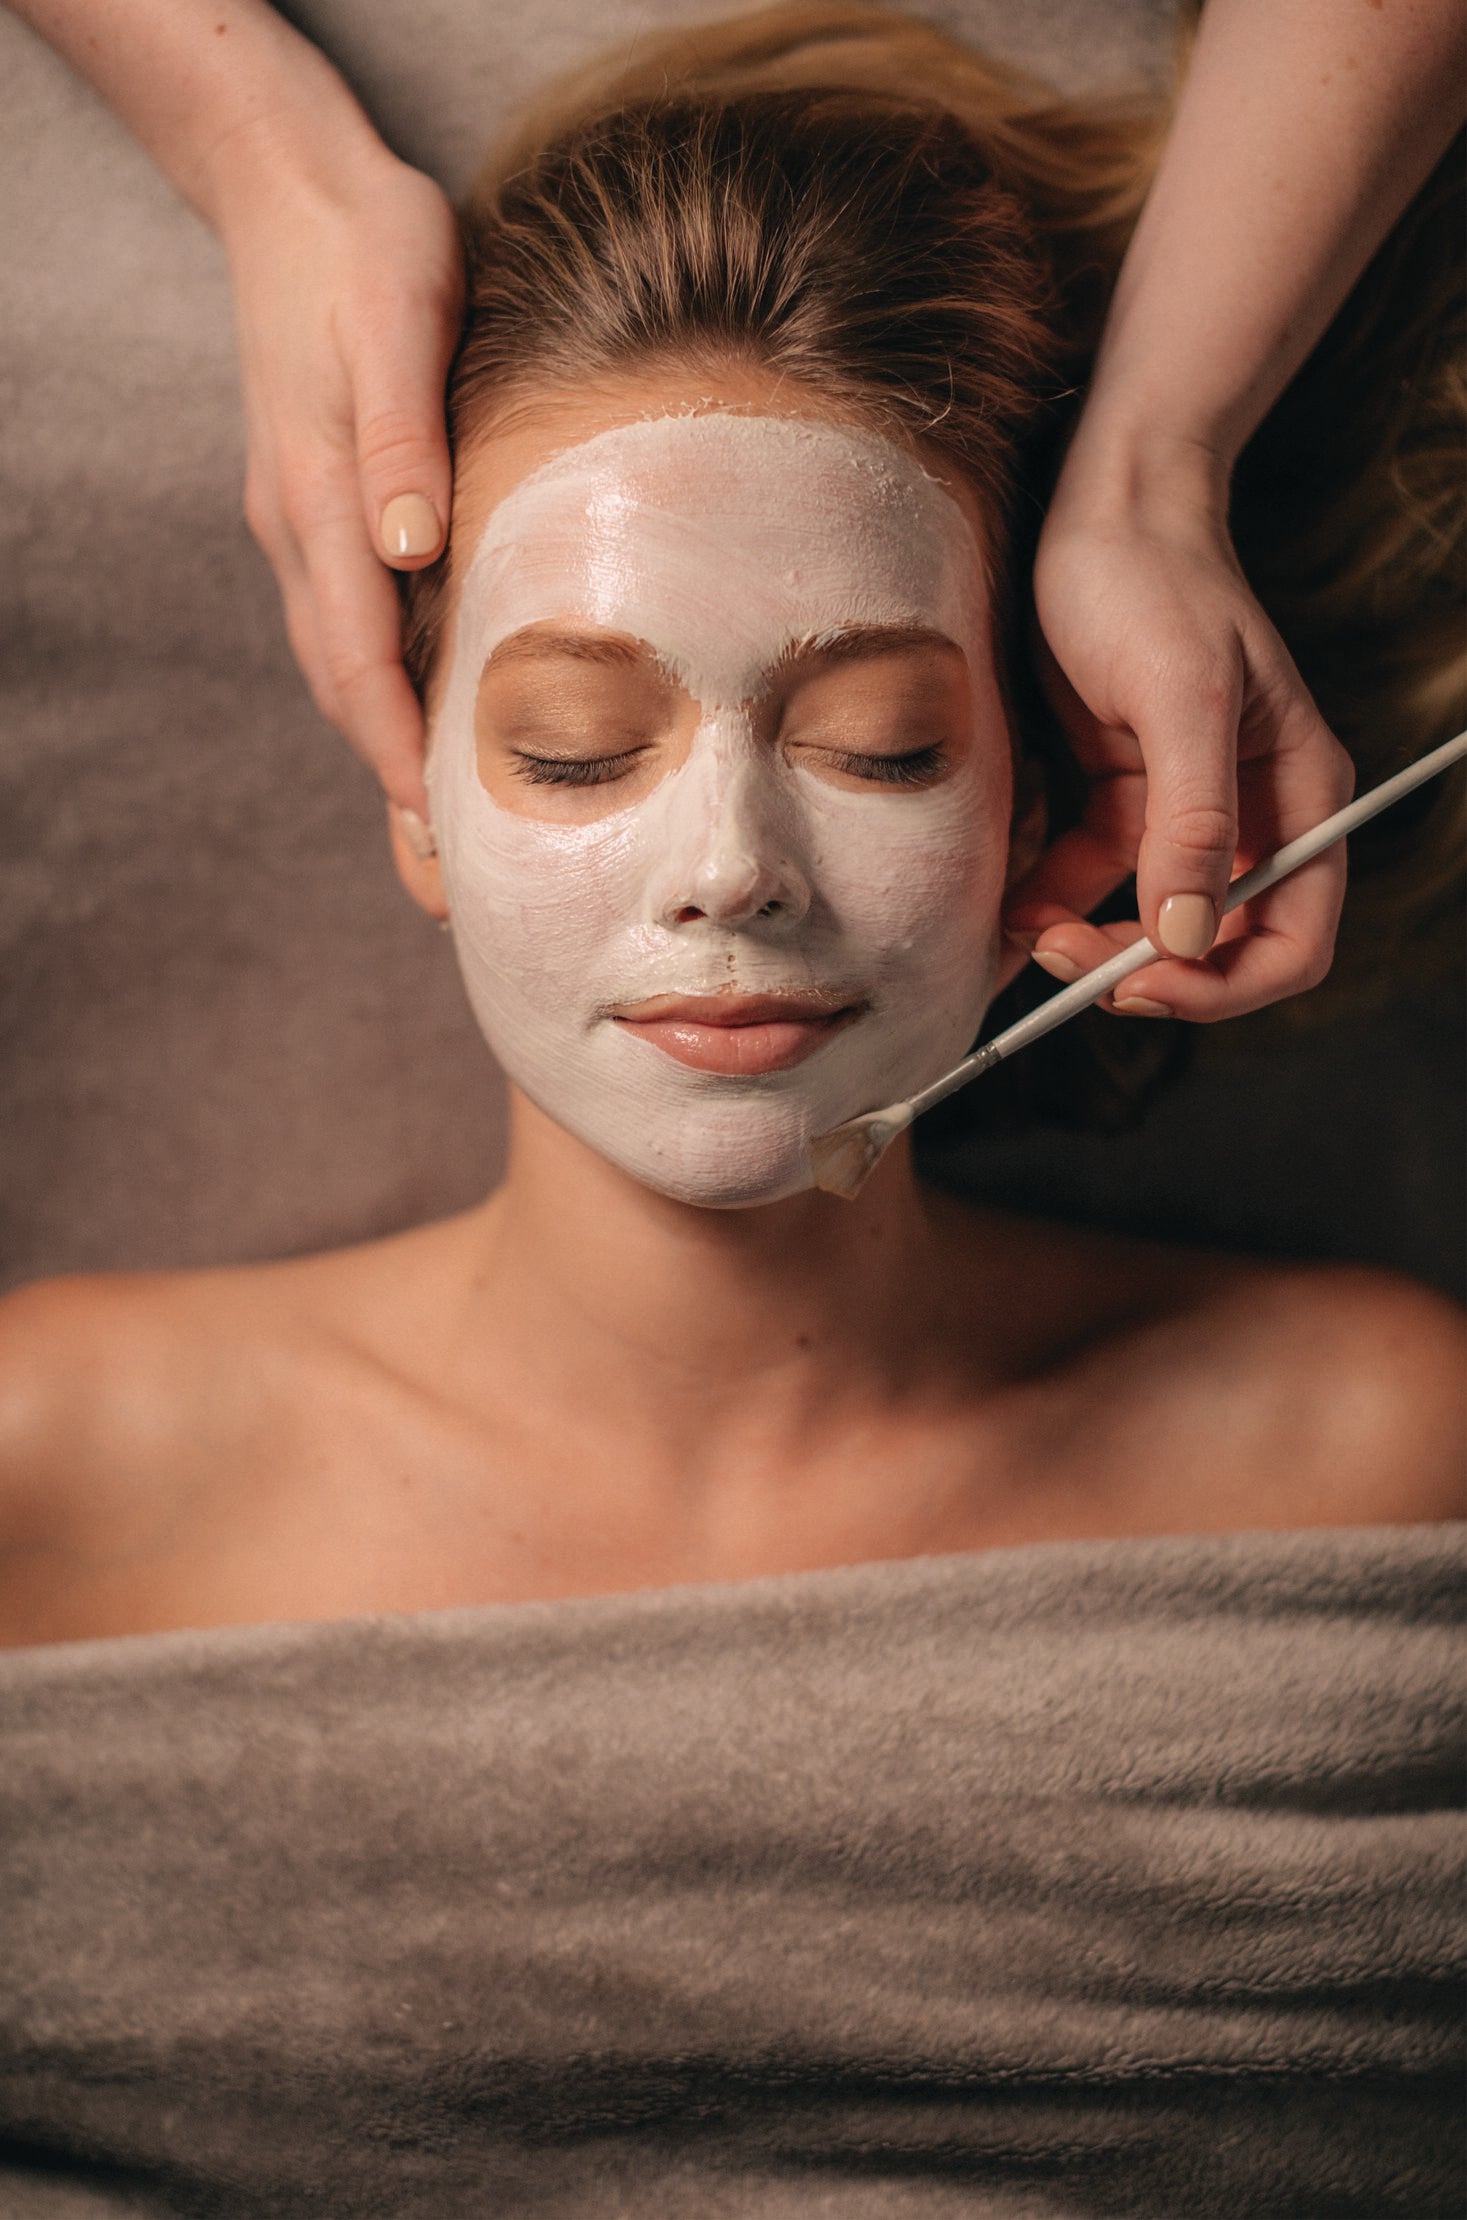 Comfort Zone:  SPA Locator Treat yourself to a [ comfort zone ] facial or treatment.-Ivy
